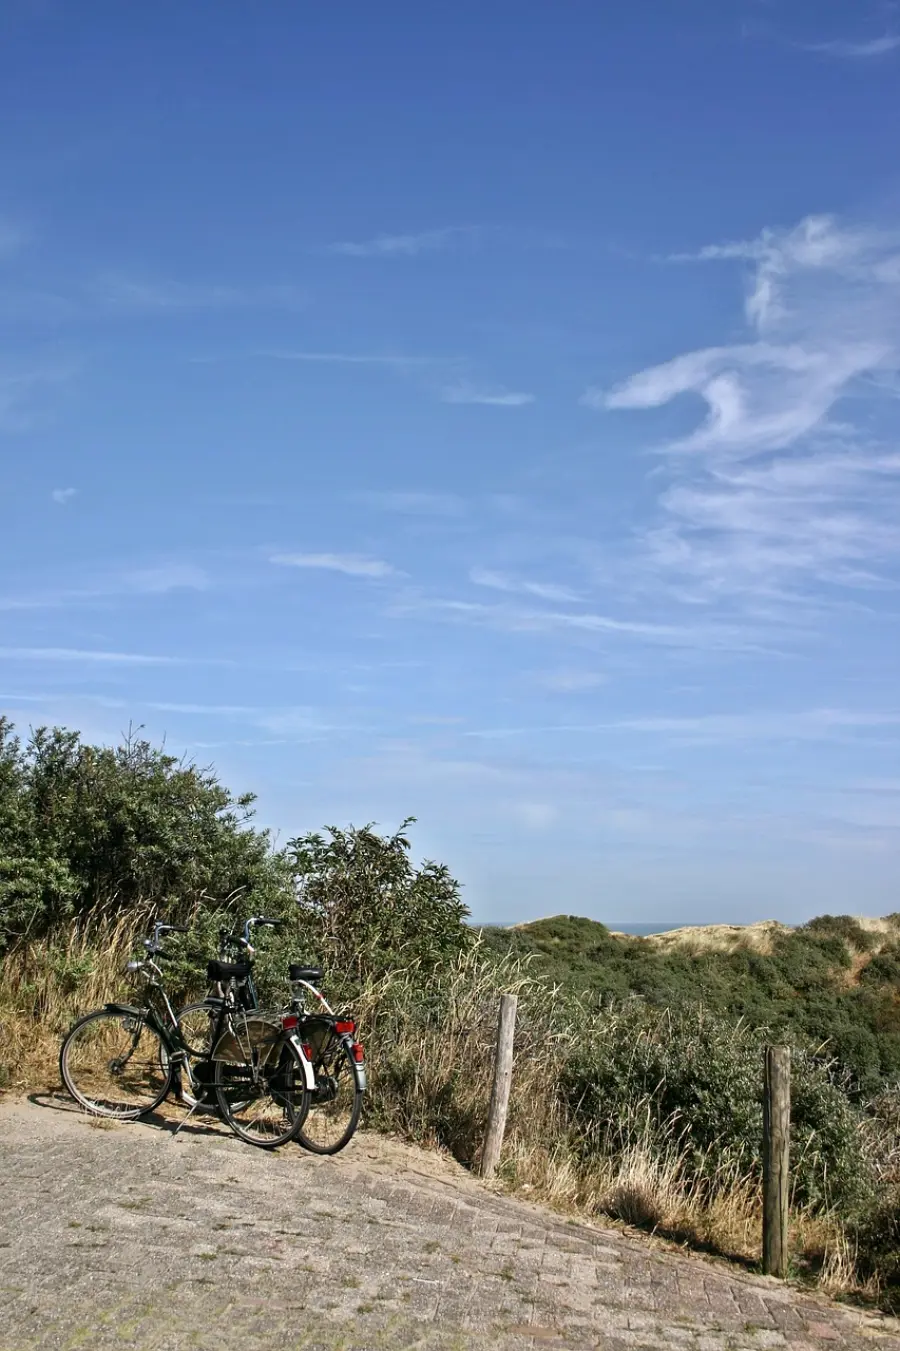 Two bicycles parked on a pathway with a backdrop of sand dunes and green shrubs under a clear blue sky, capturing the essence of a cycling adventure on Murter Island